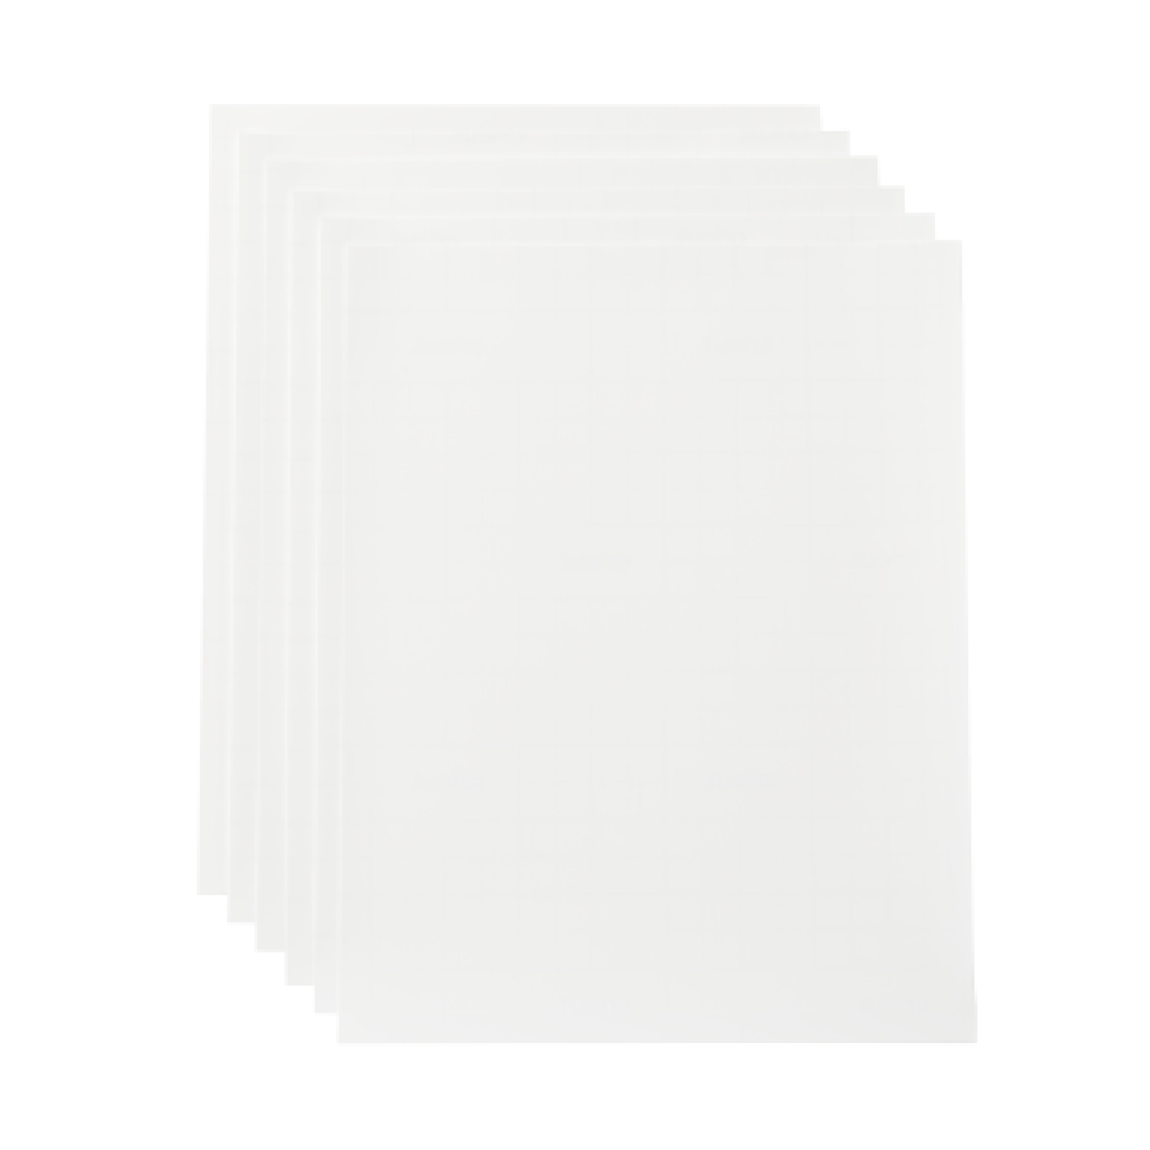 Printable Sticker Paper - US Letter (8 ct)